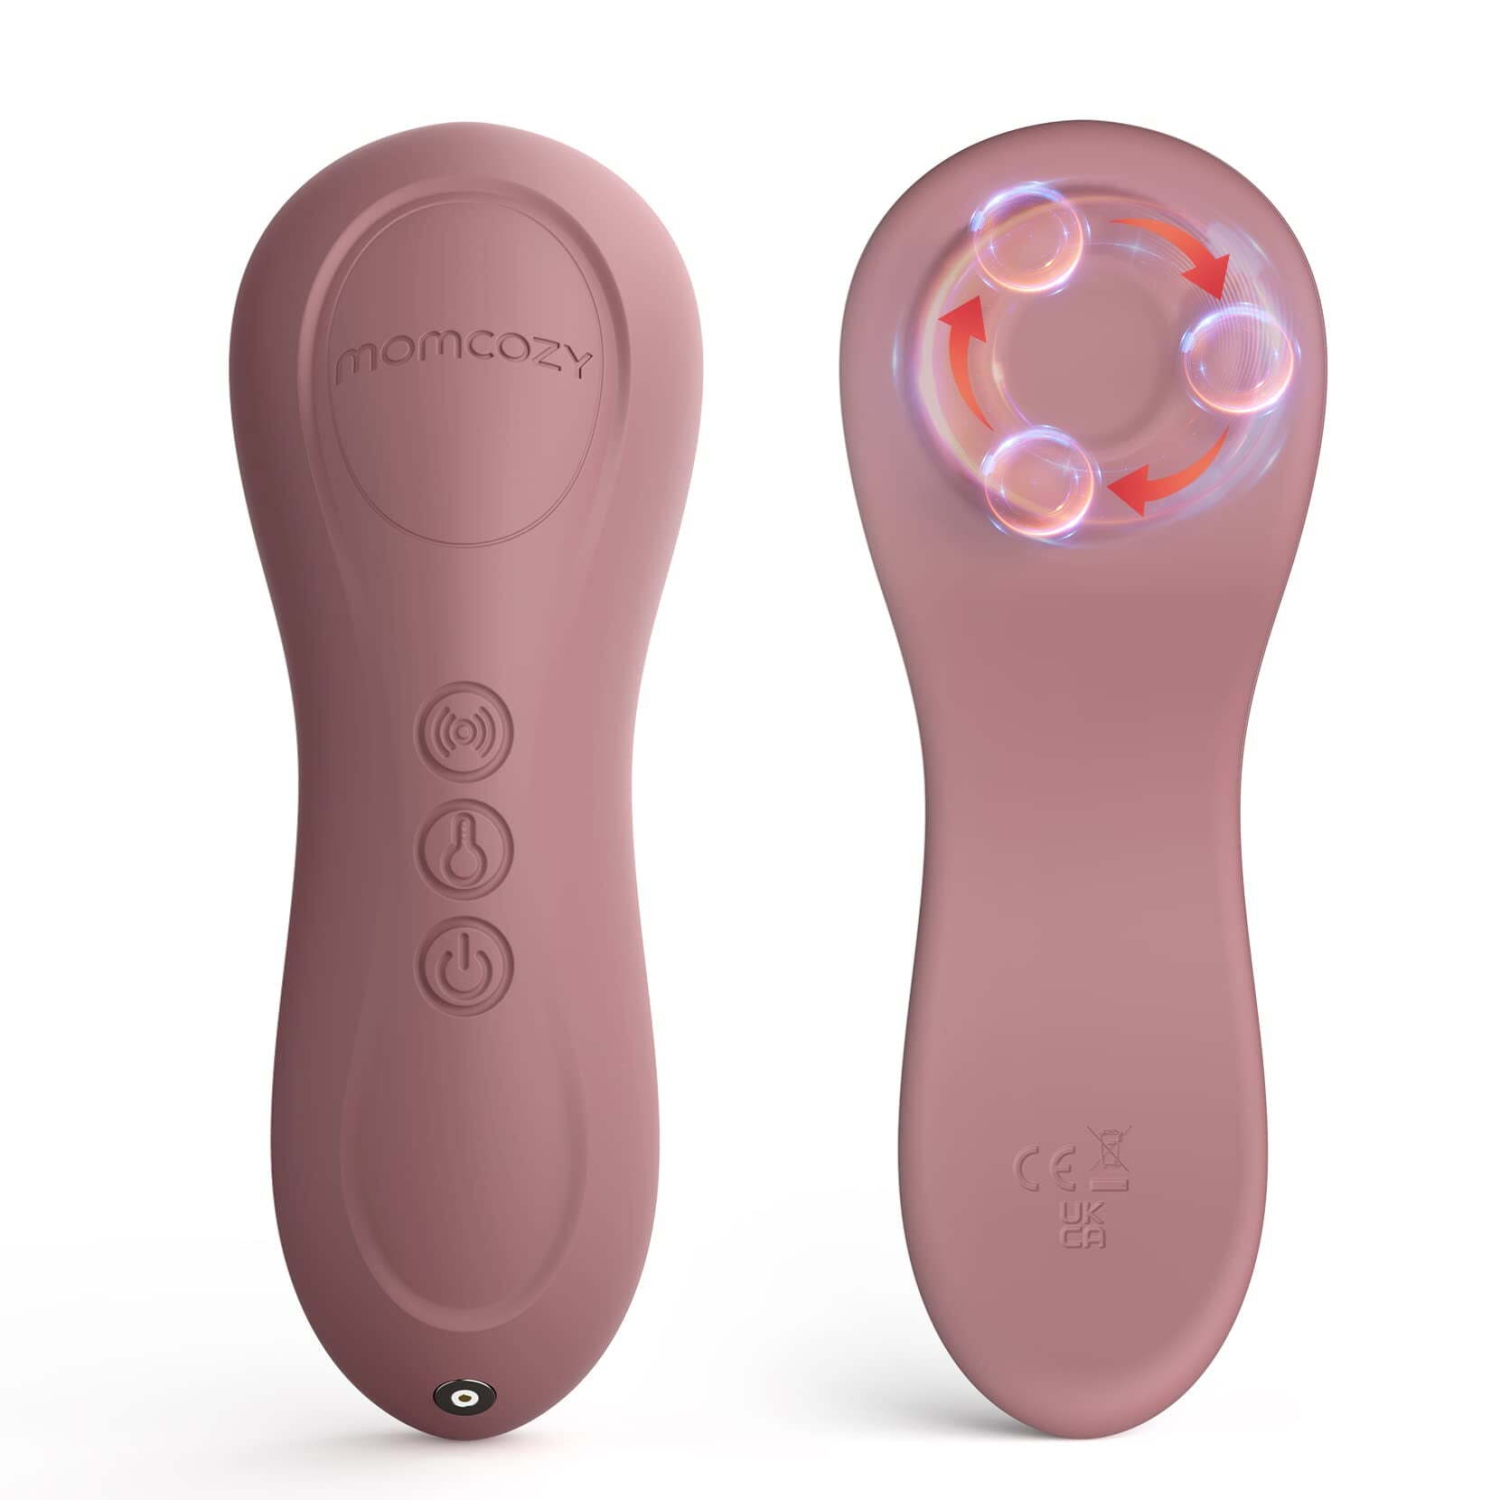 Momcozy Kneading Lactation Massager with Heat, 3-in-1 Real-Like Massage for Relieve Clogged Ducts, Breast Massager Warming for Breastfeeding, Improve Milk Flow